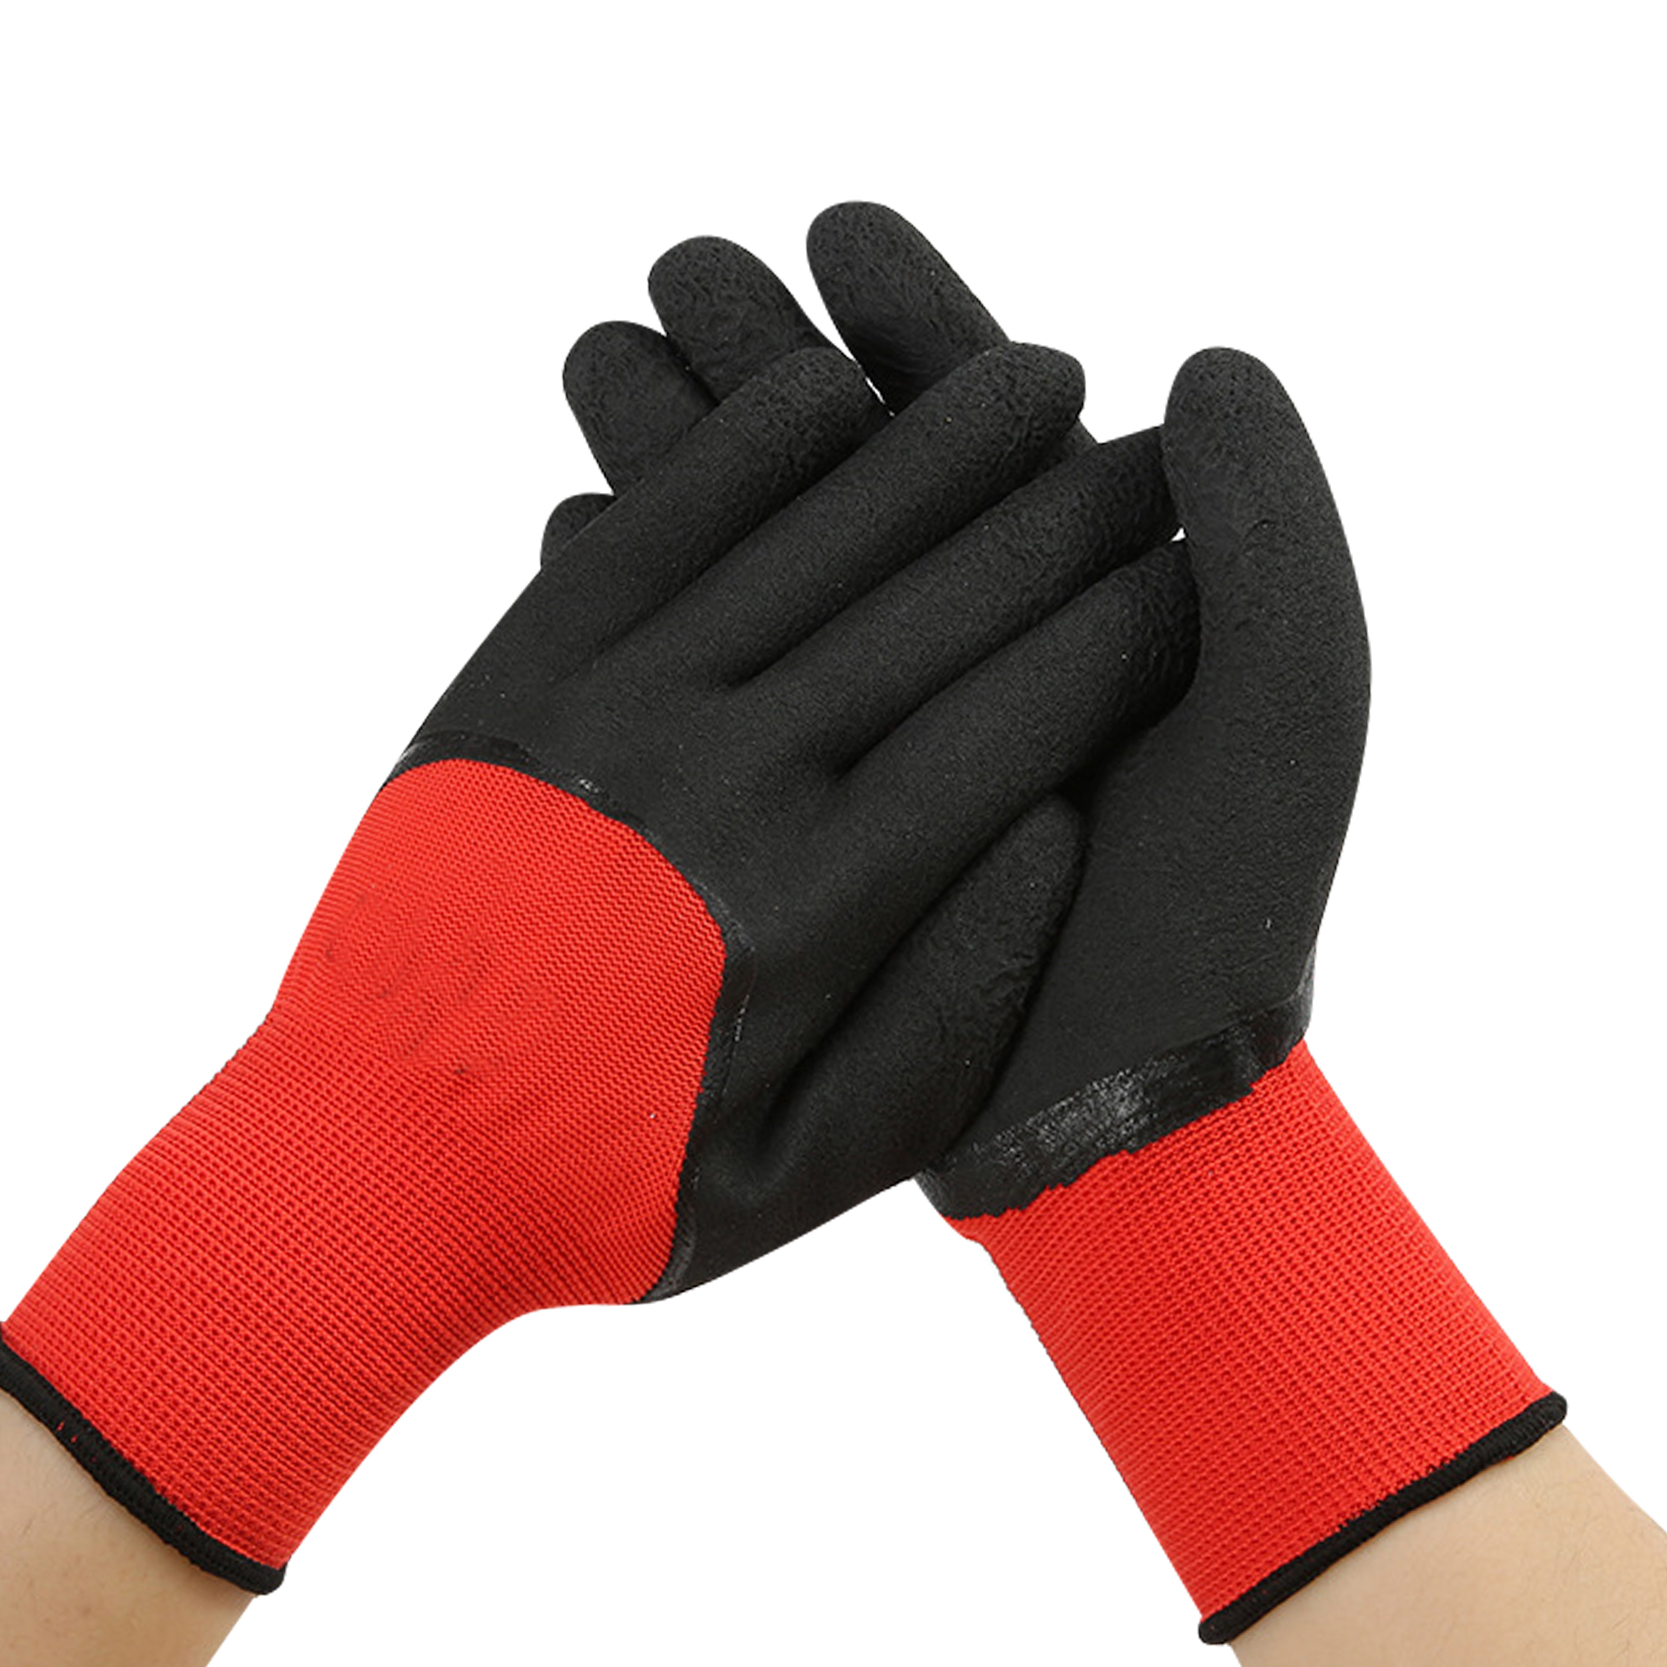 Work Gloves, Latex Rubber Coated Gloves for Work, Gardening and General Purposes